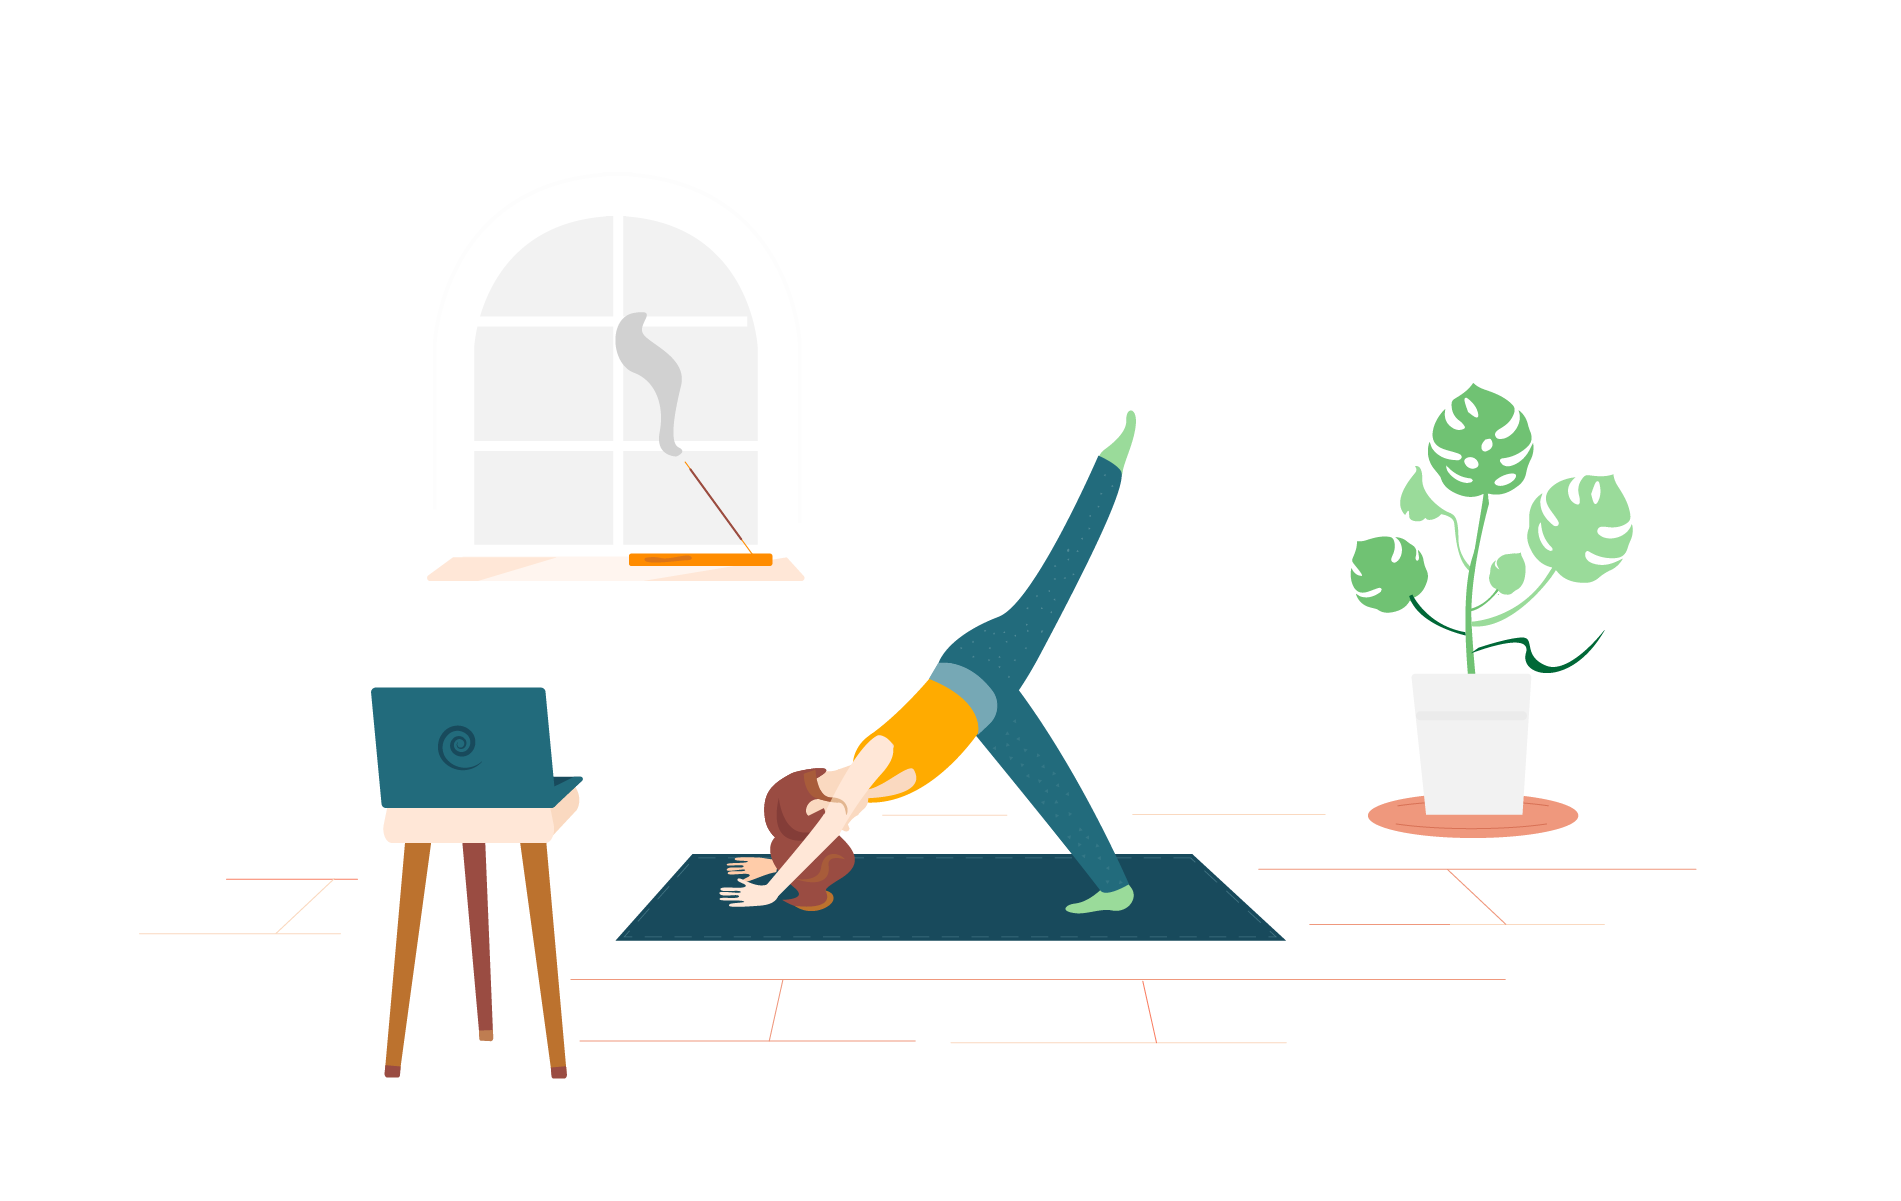 23 exercise ideas and tips for remote workers